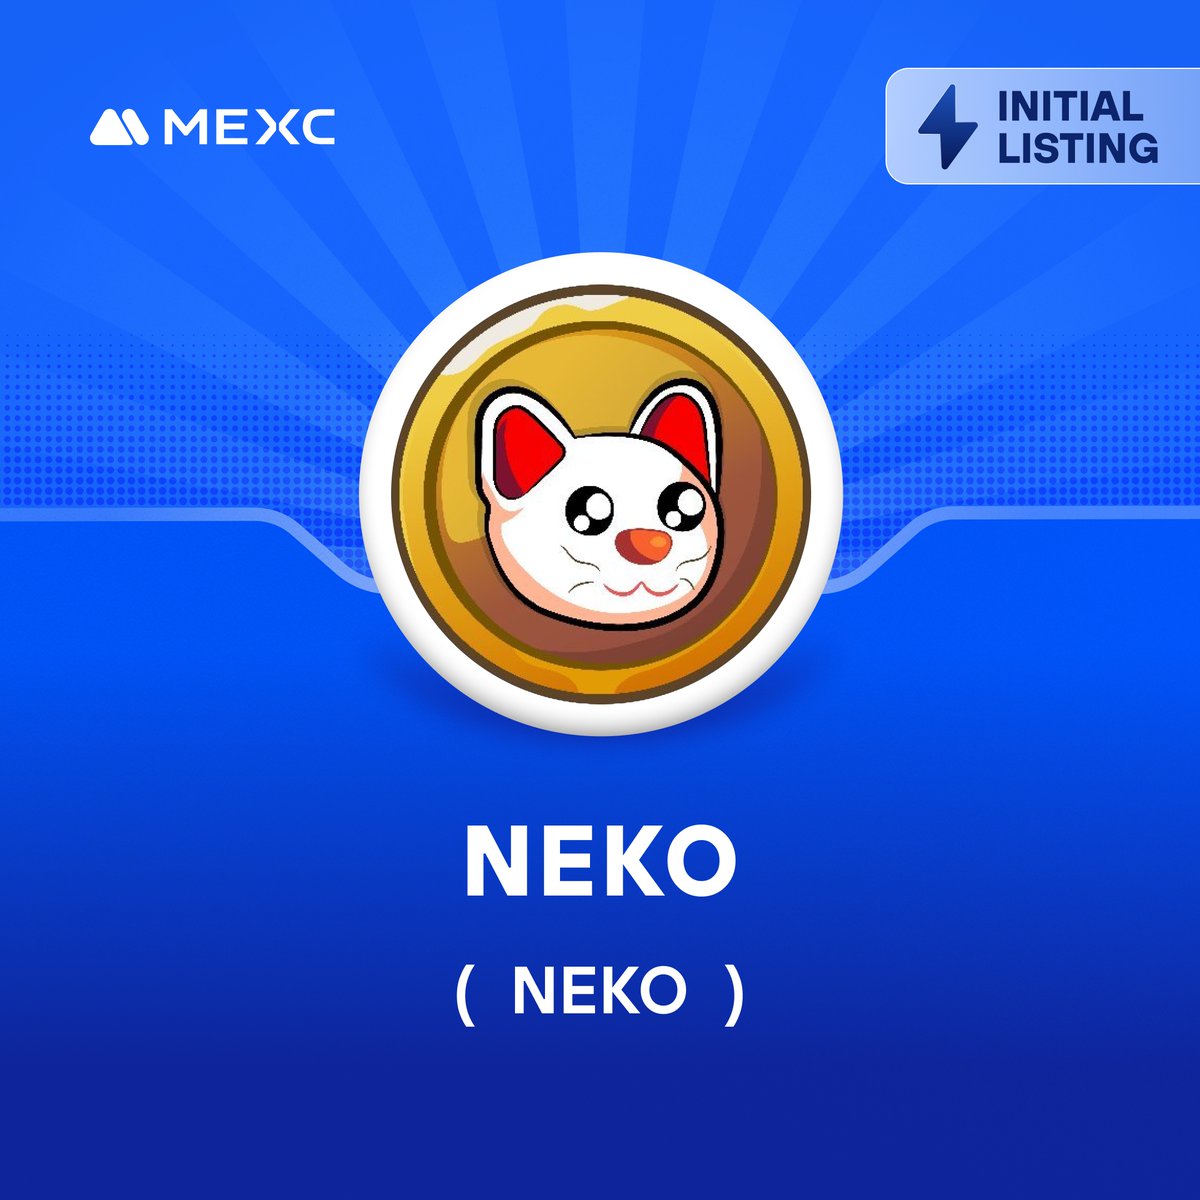 We're thrilled to announce that the @nekotoken_xyz Kickstarter has concluded and $NEKO will be listed on #MEXC! 🔹Deposit: Opened 🔹NEKO/USDT Trading in Innovation Zone: 2024-04-17 15:00 (UTC) Details: mexc.com/support/articl…